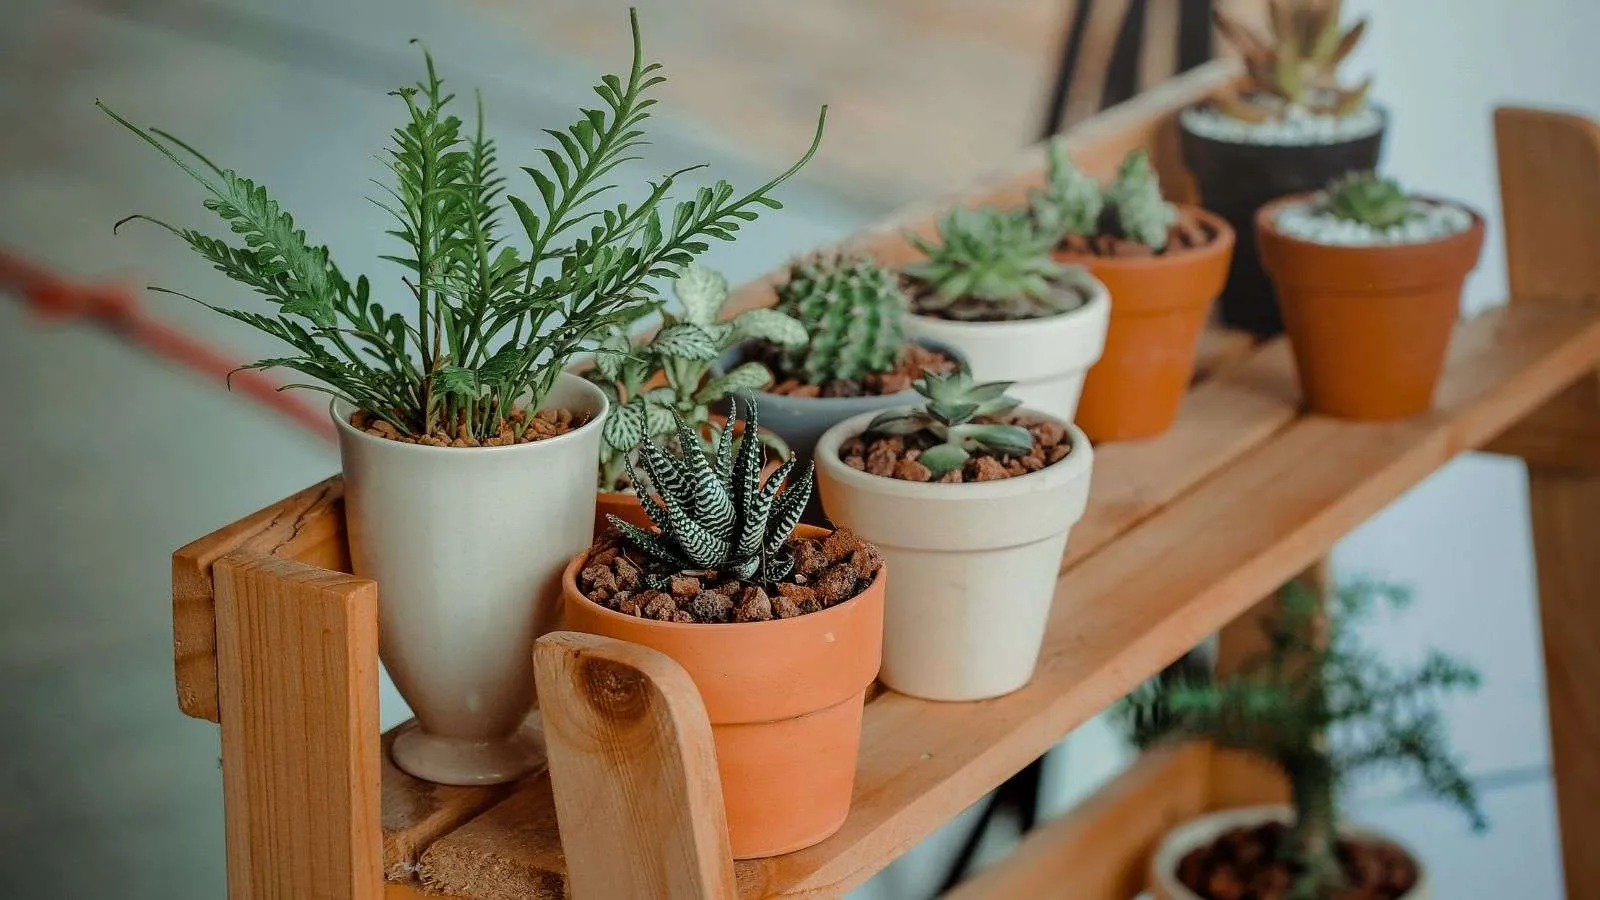 roaches in neglected potted plants - bighomeprojects.com